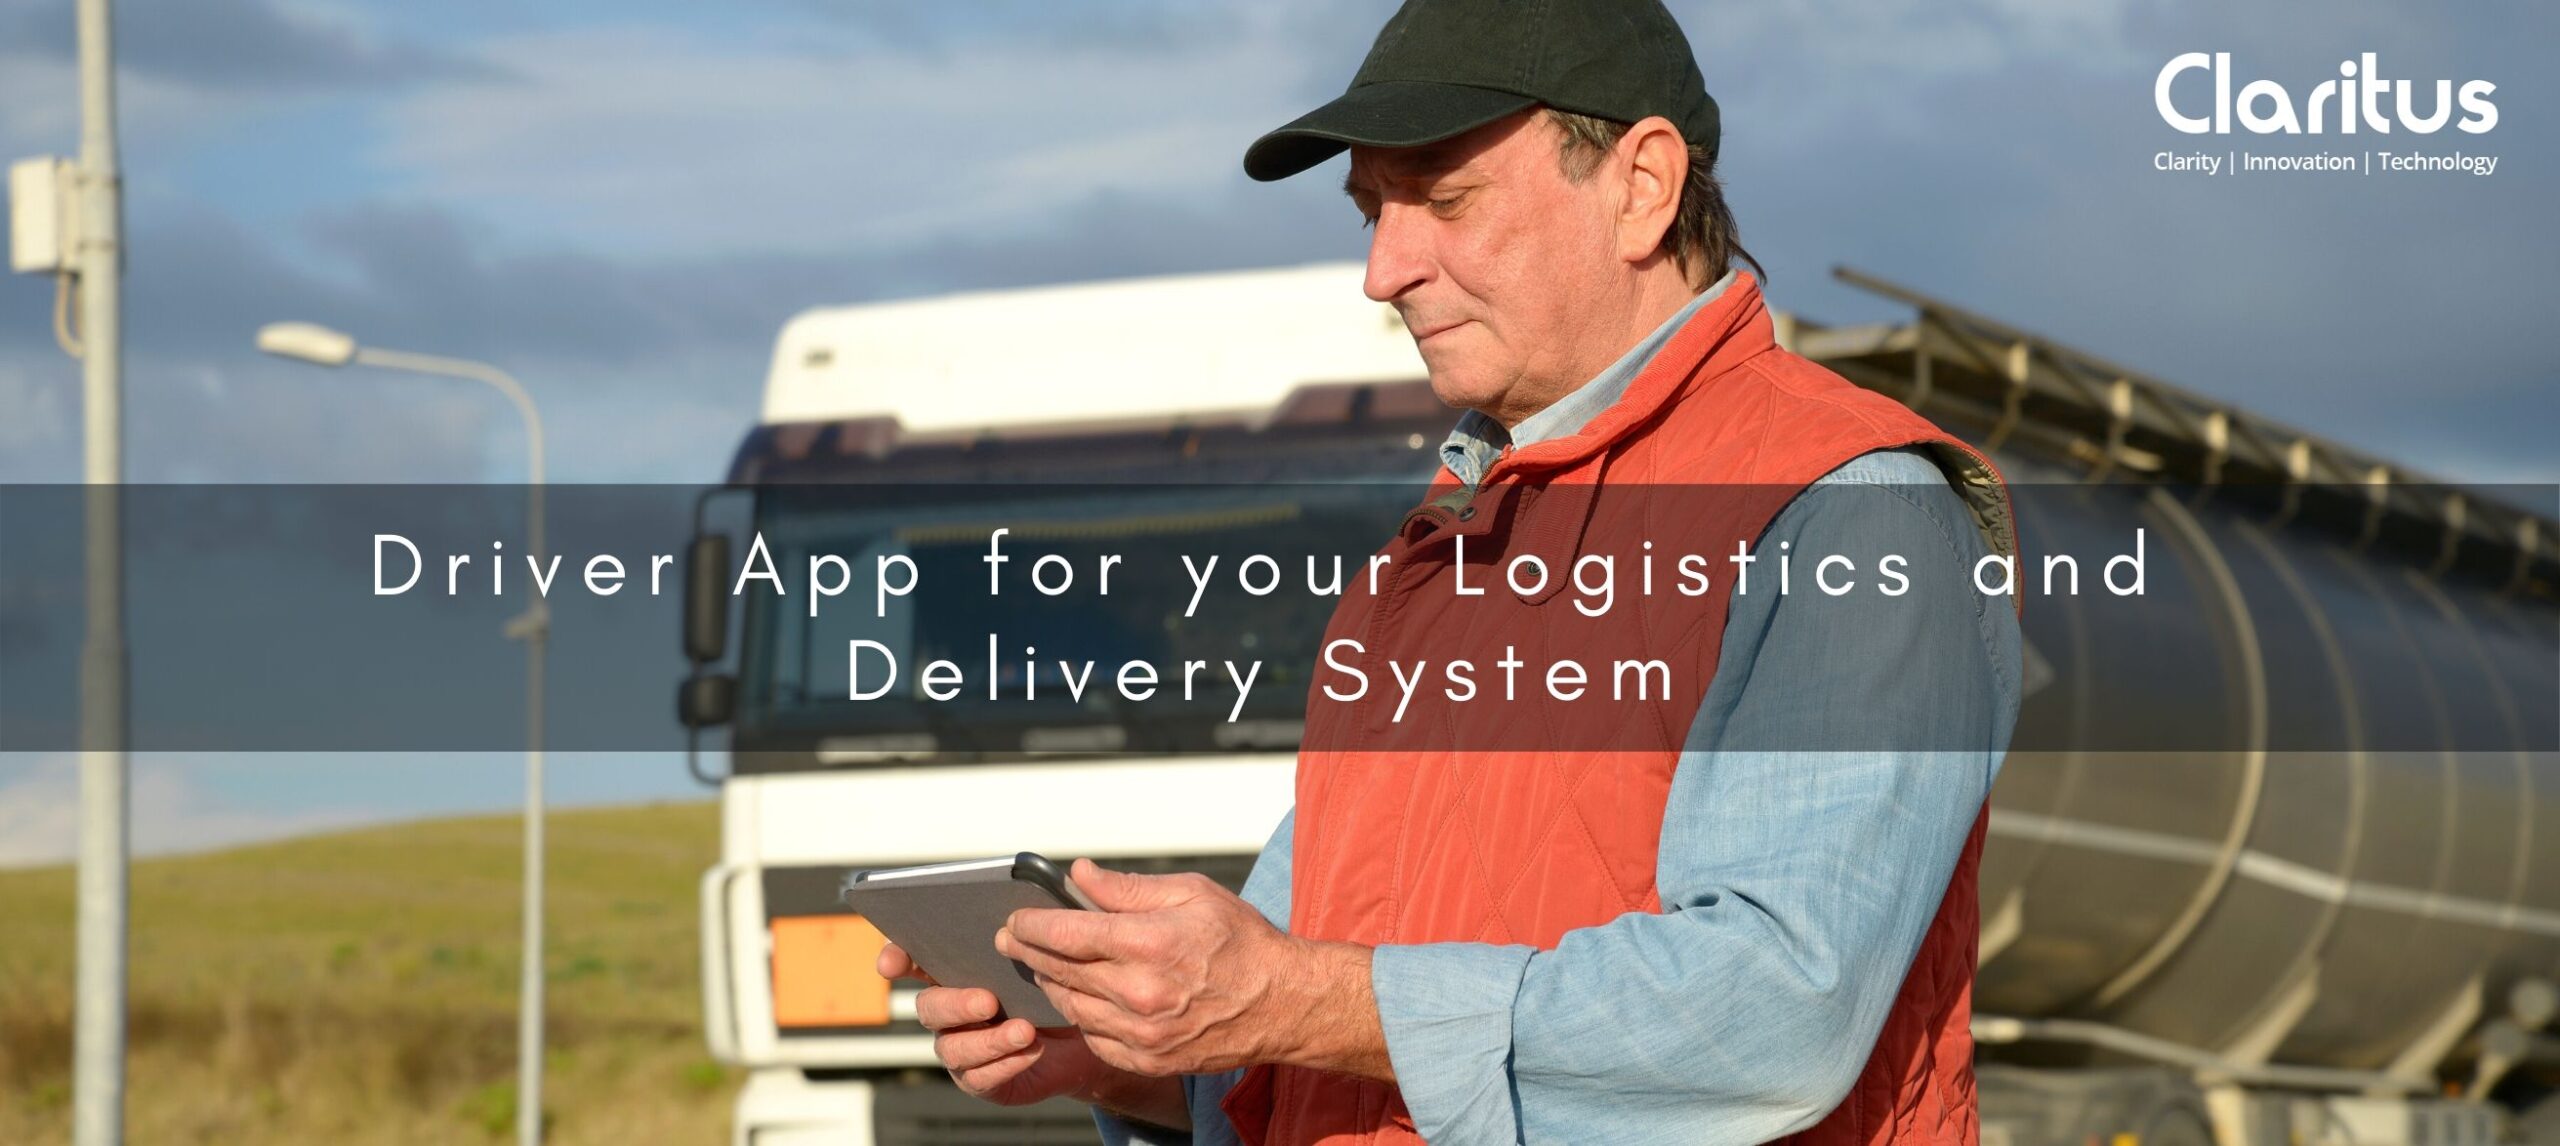 Driver App for your Logistics and Delivery System scaled